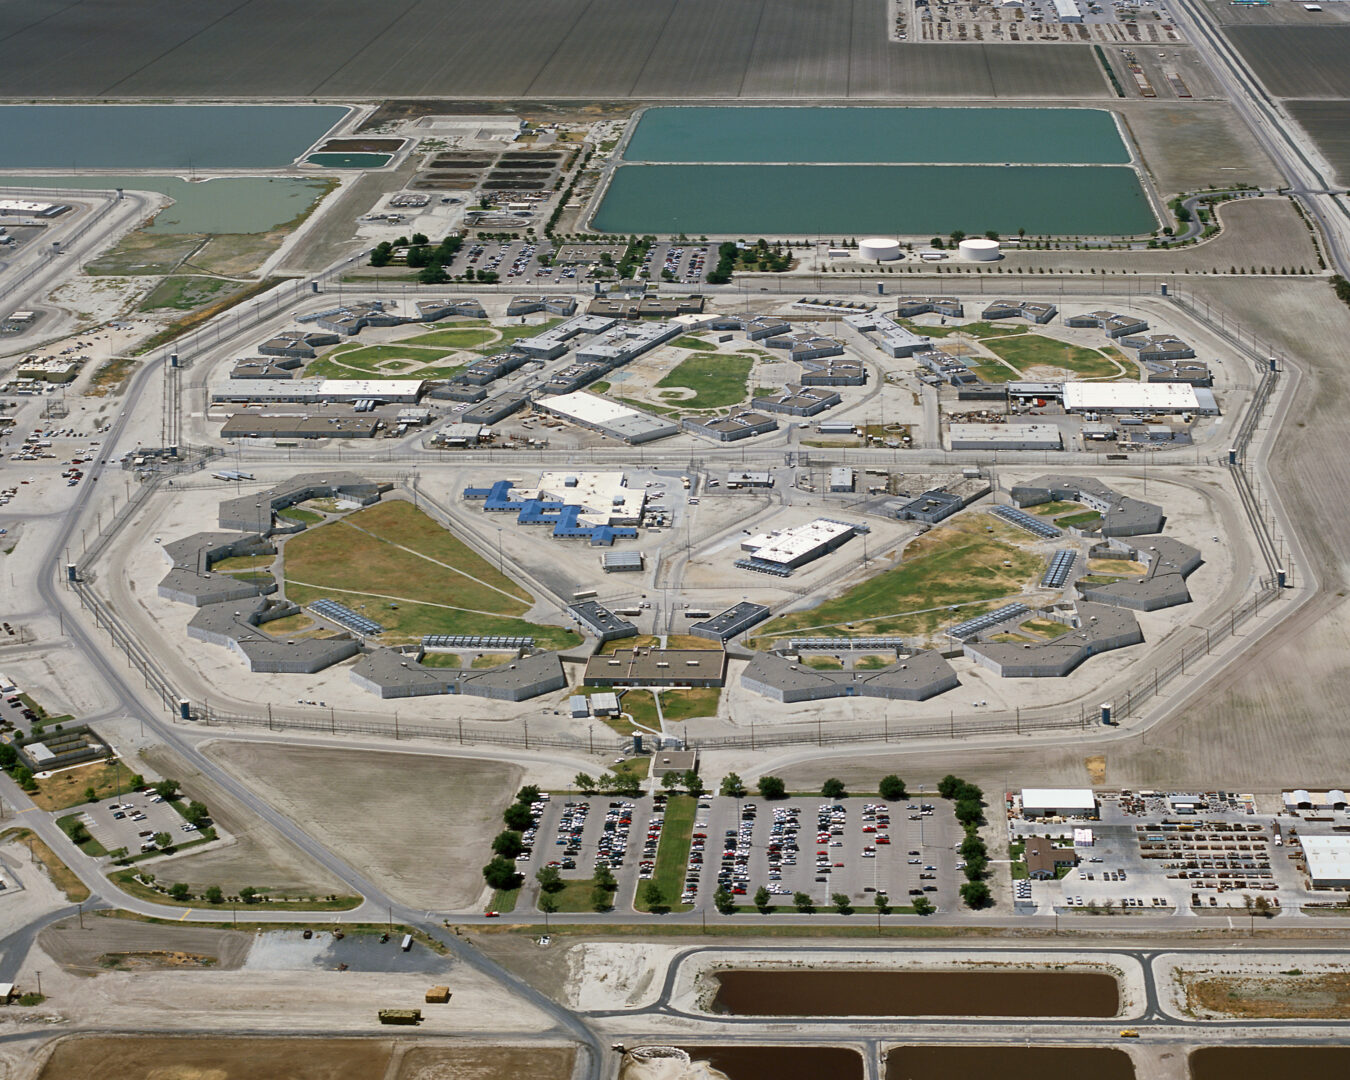 Aerial view of Corcoran State Prison in California